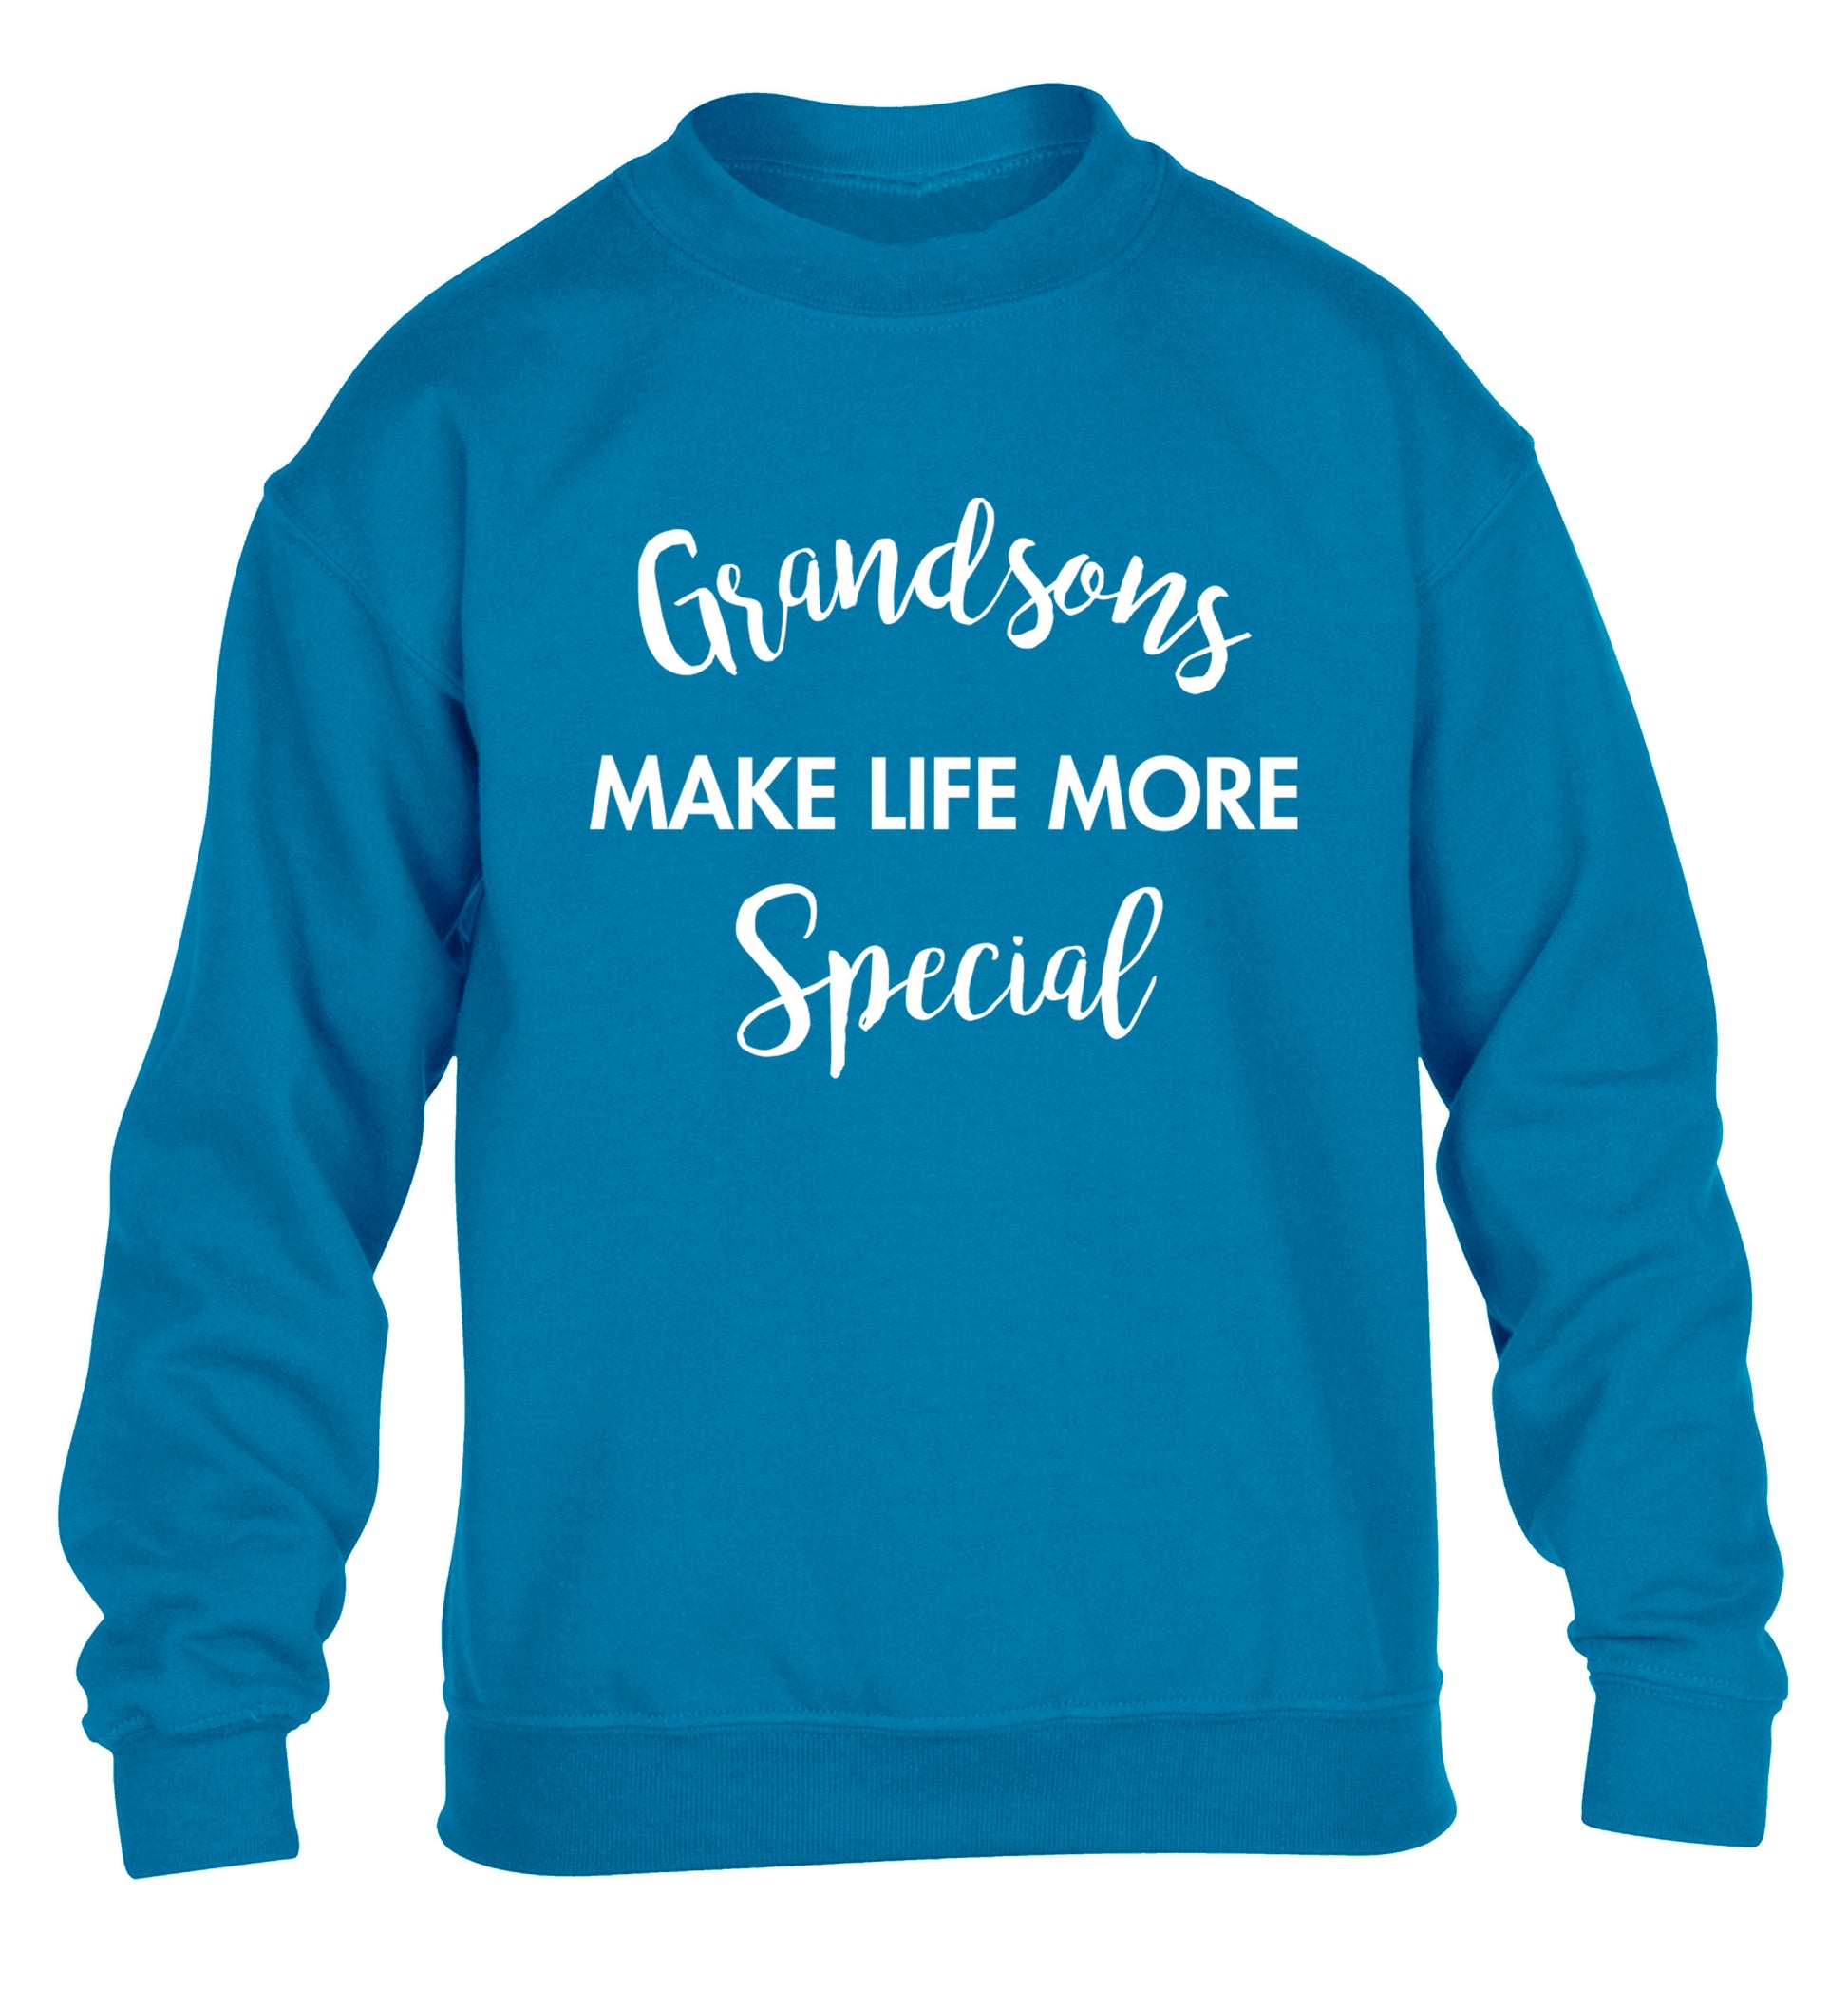 Grandsons make life more special children's blue sweater 12-14 Years